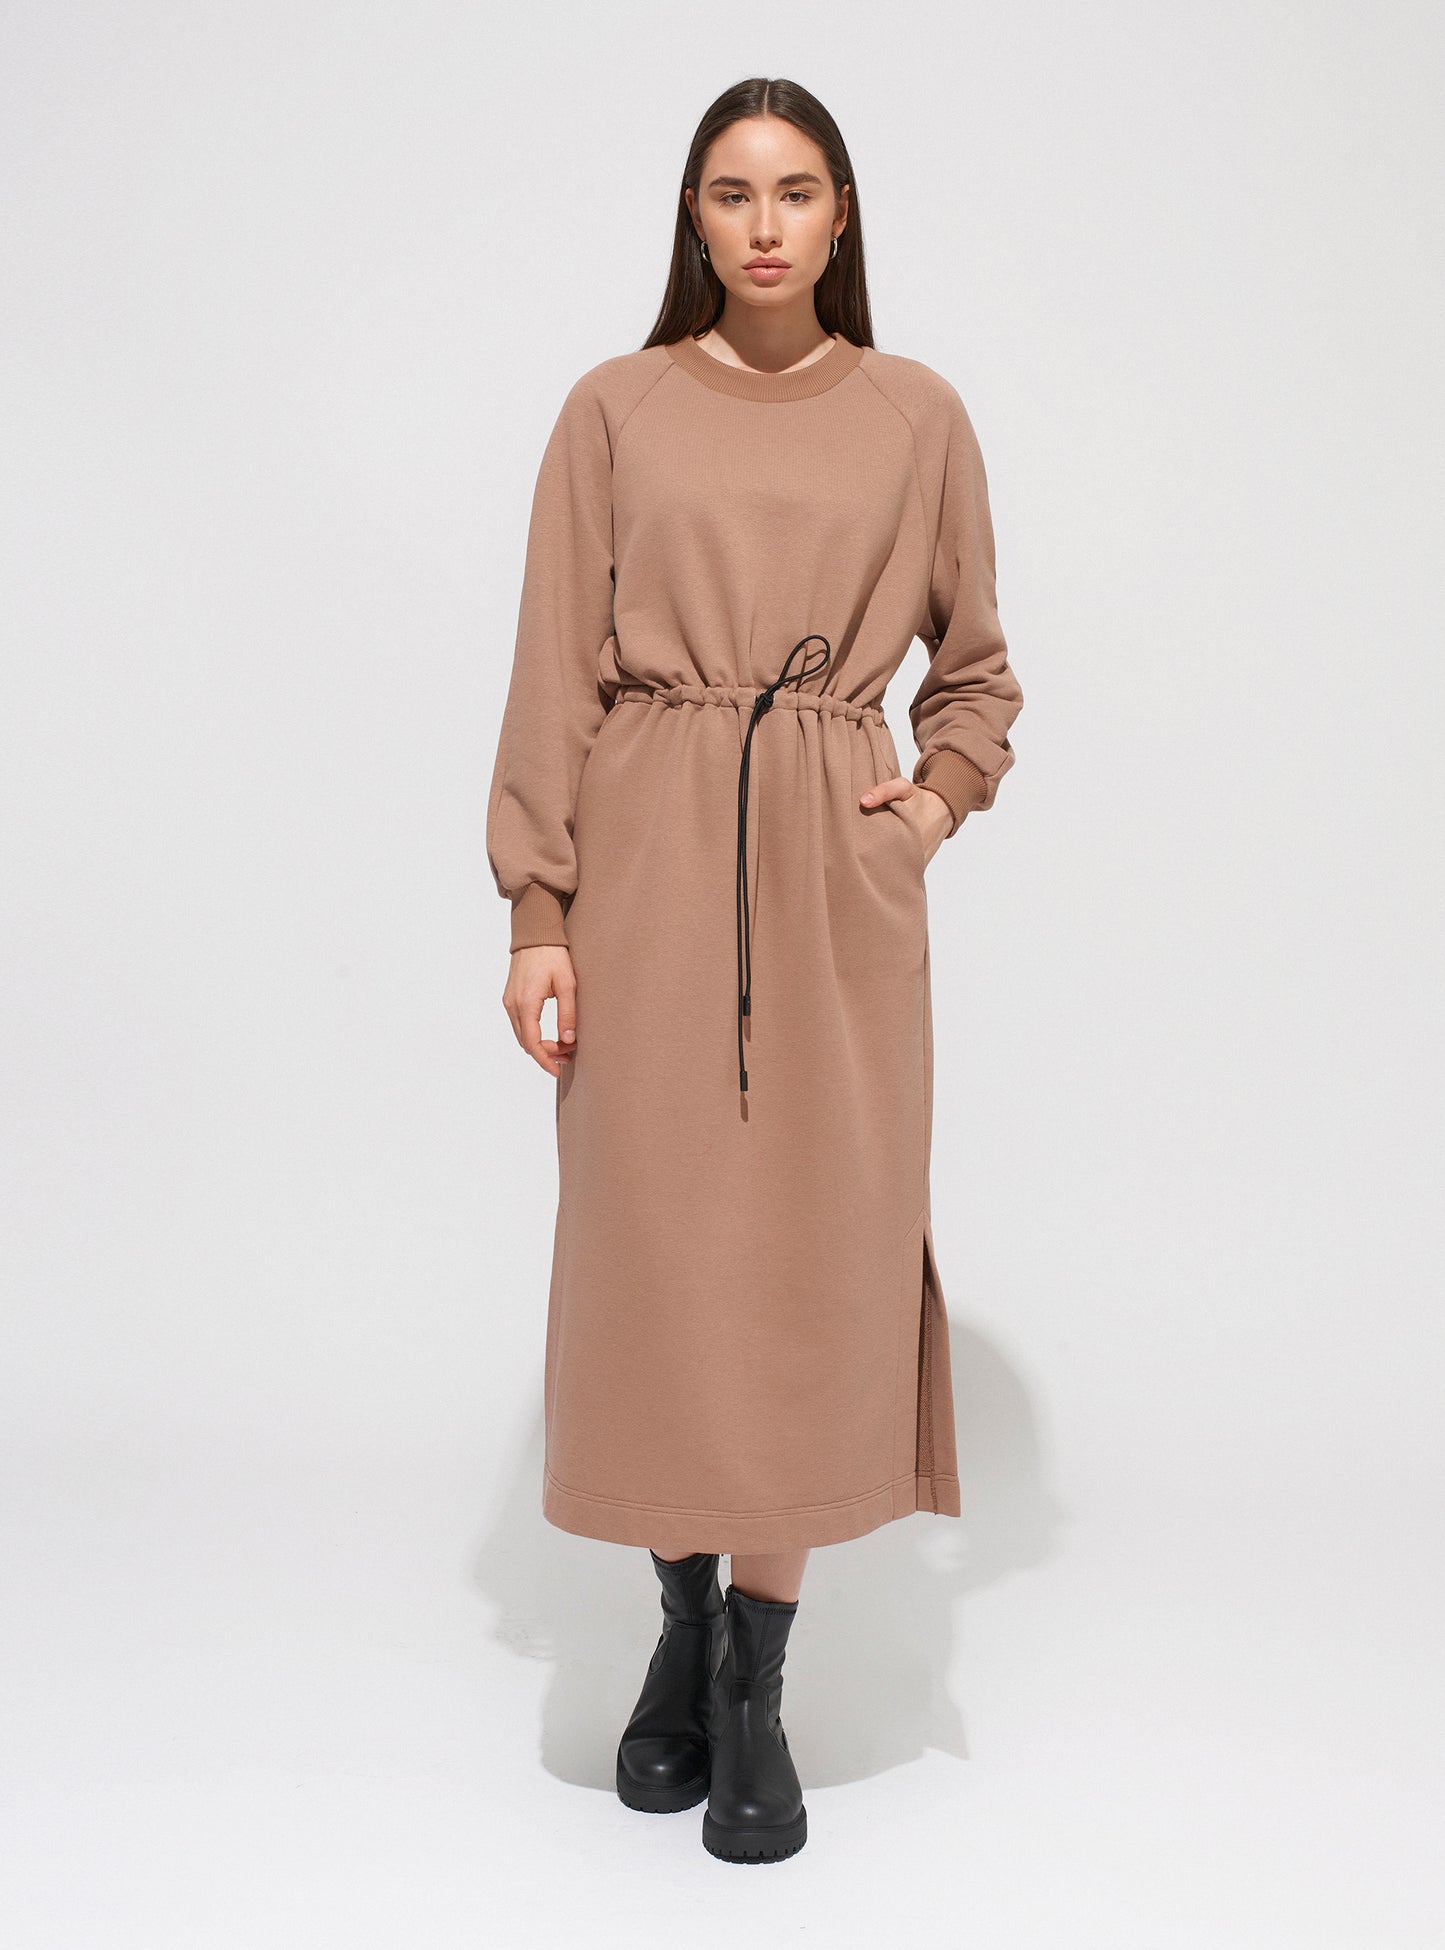 Light Brown Elastic Wasted Cotton Dress